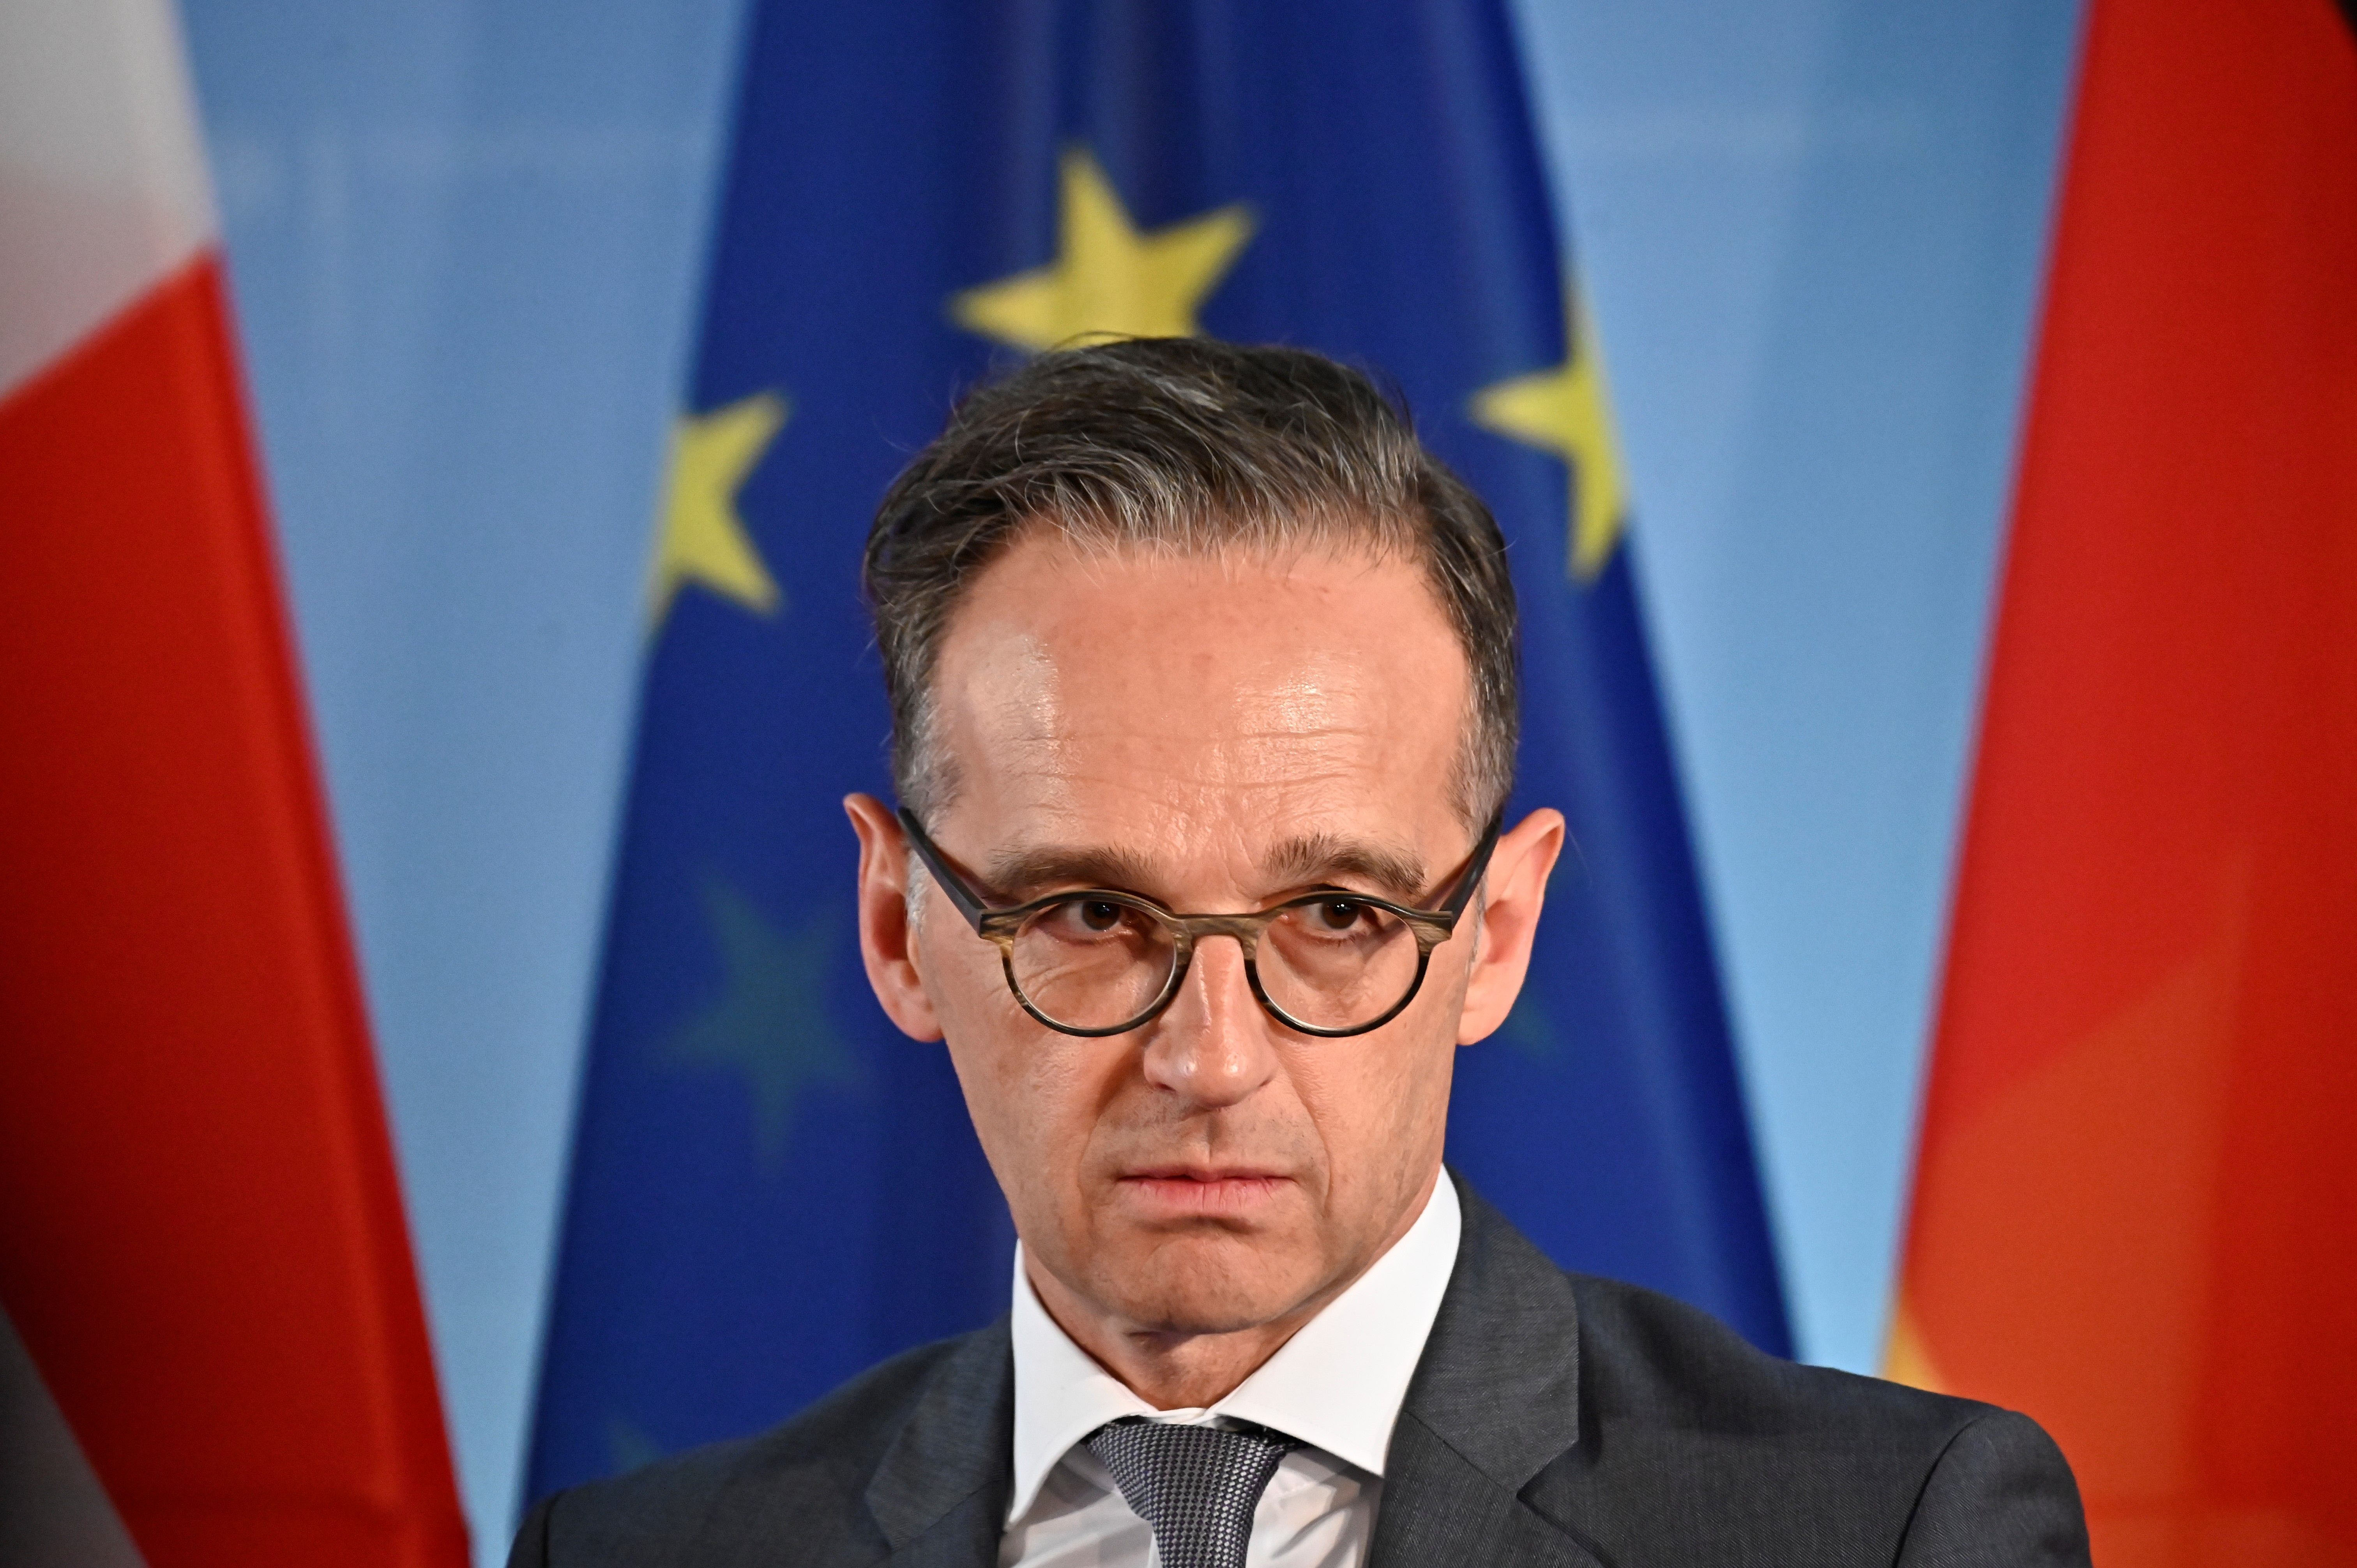 German Foreign Minister Heiko Maas gives a statement to the press in Berlin on May 19.